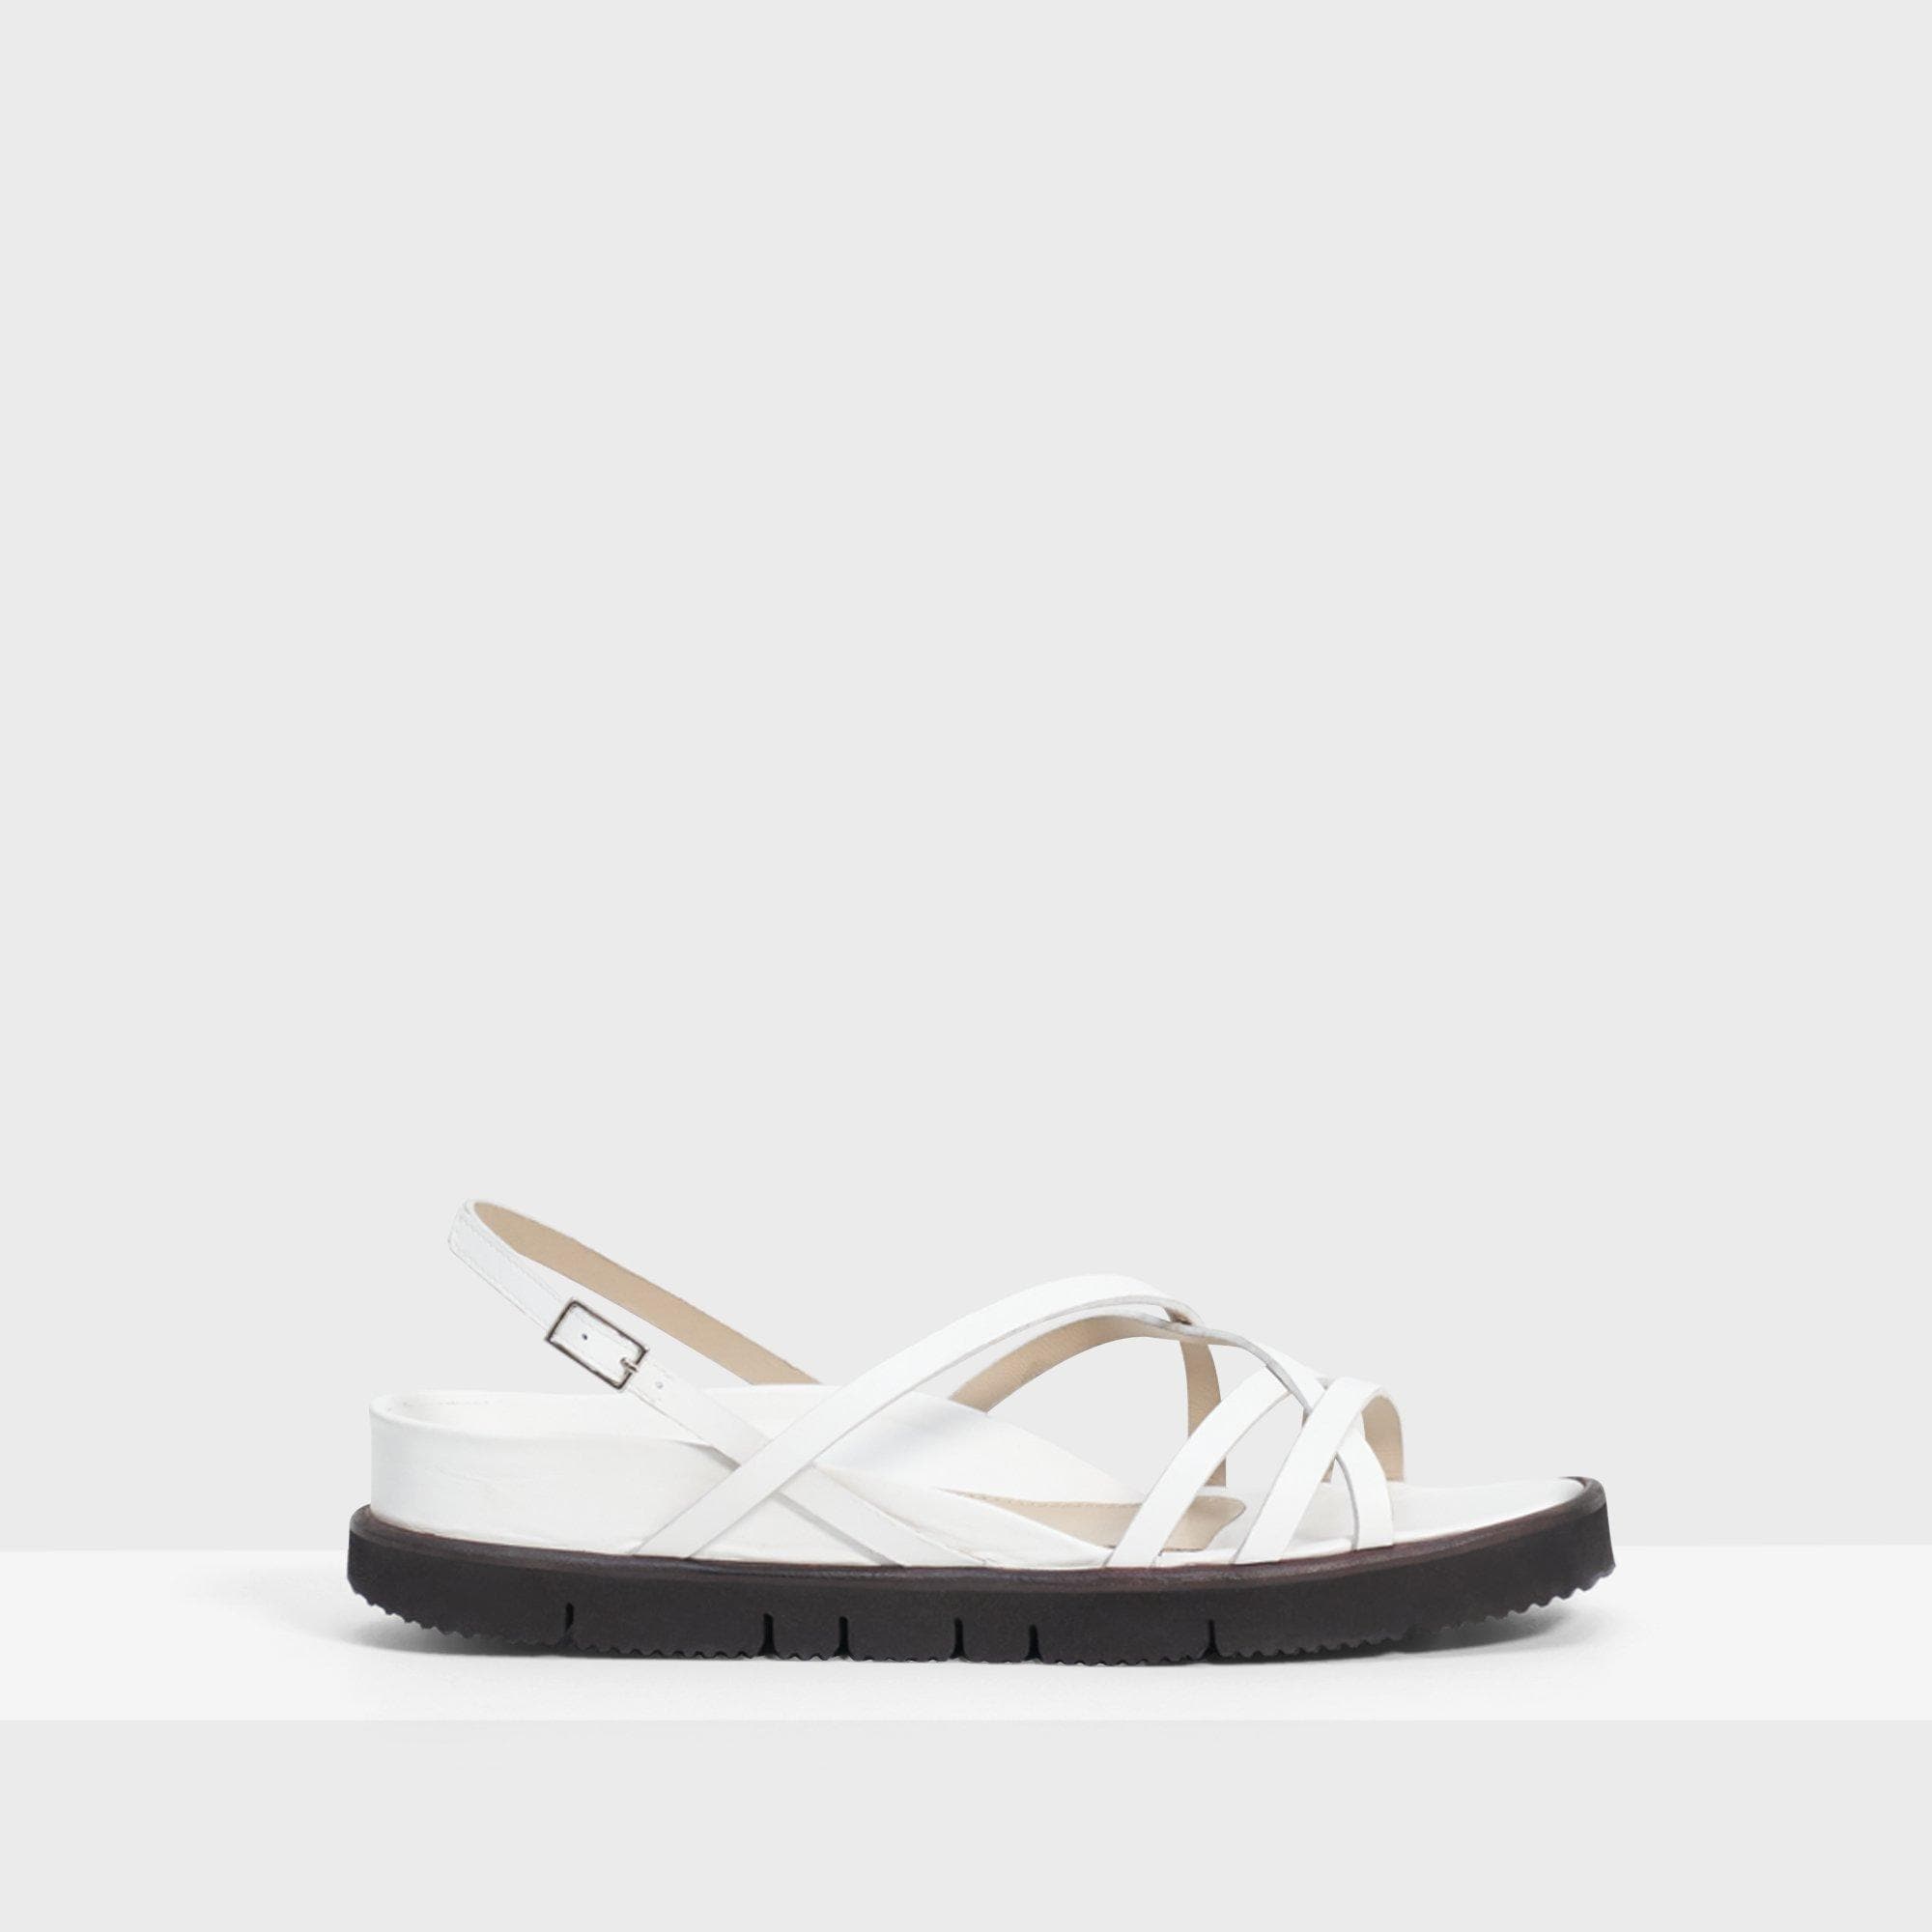 Theory Multi-Strap Lug Sandal in Leather